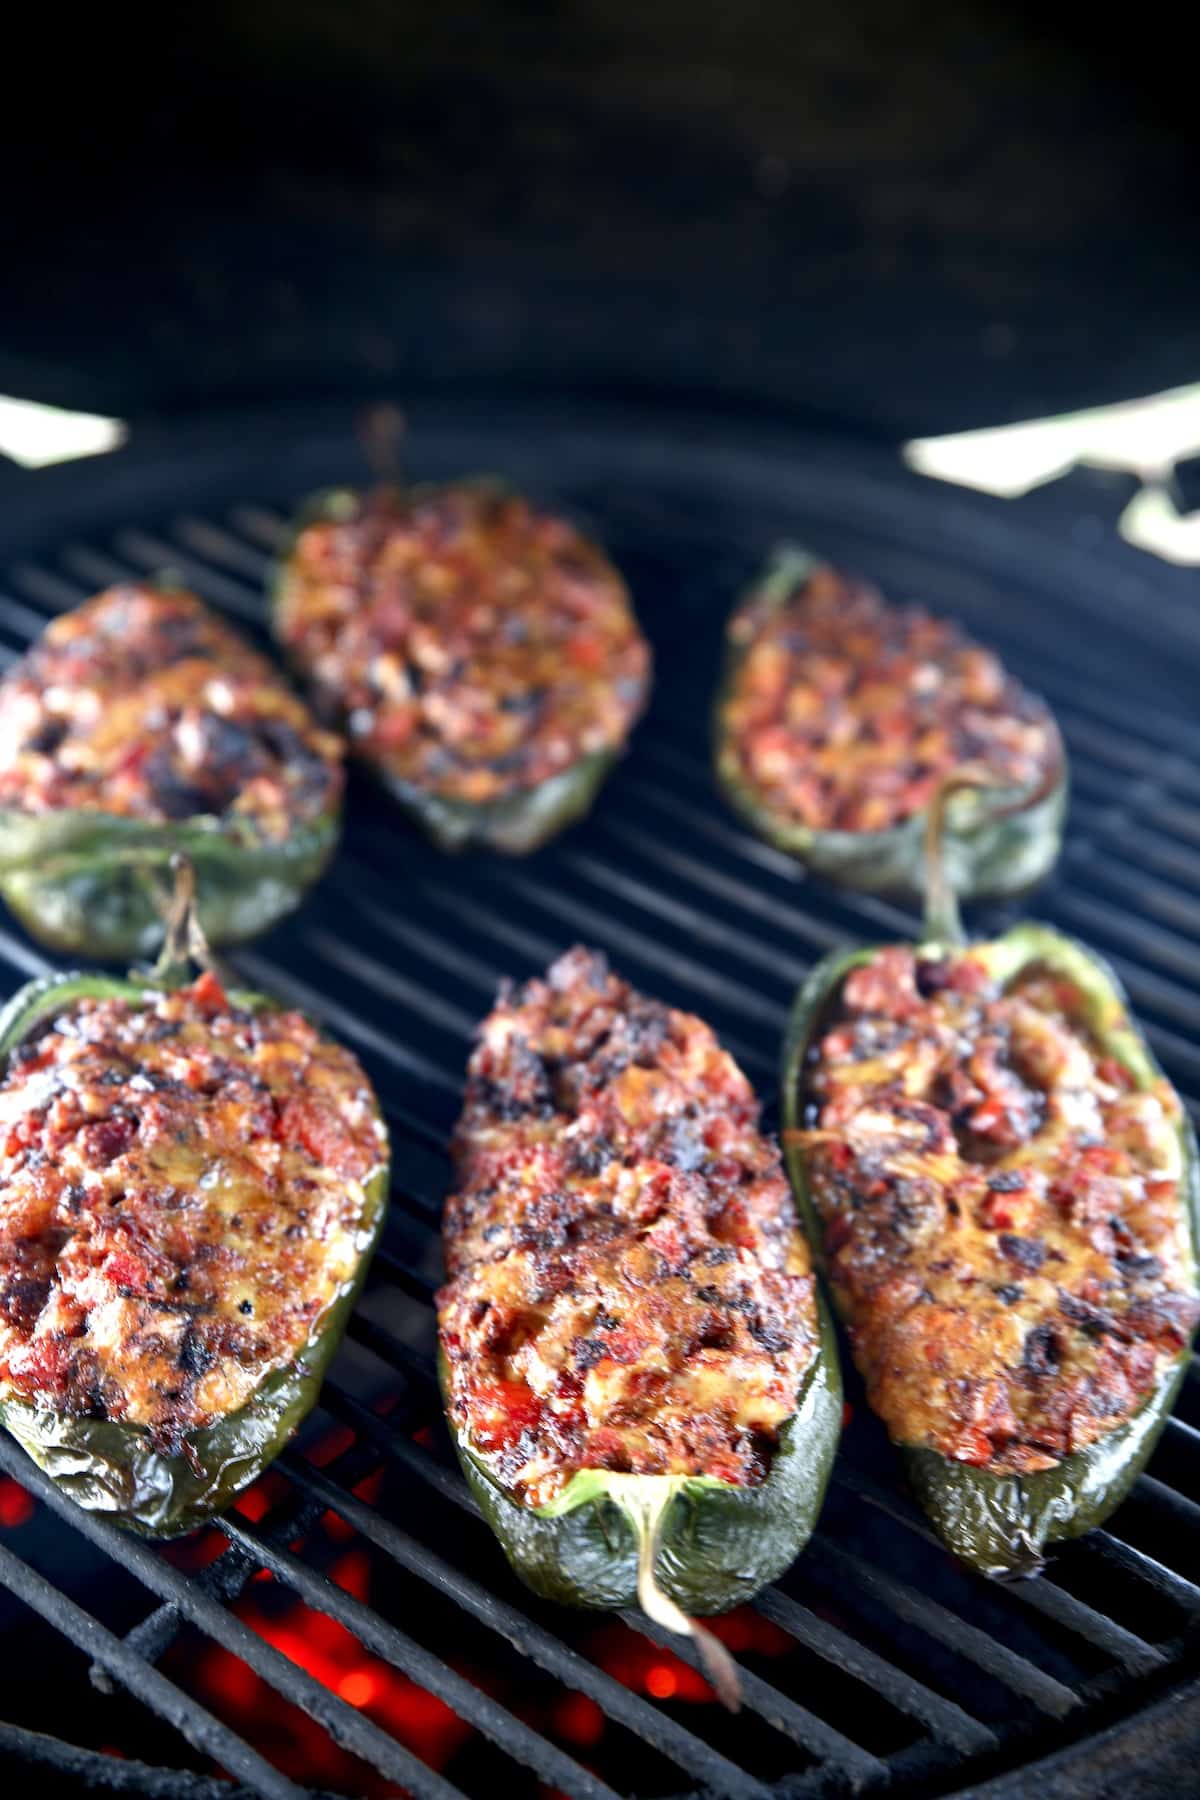 6 grilled poblano peppers stuffed with brisket.